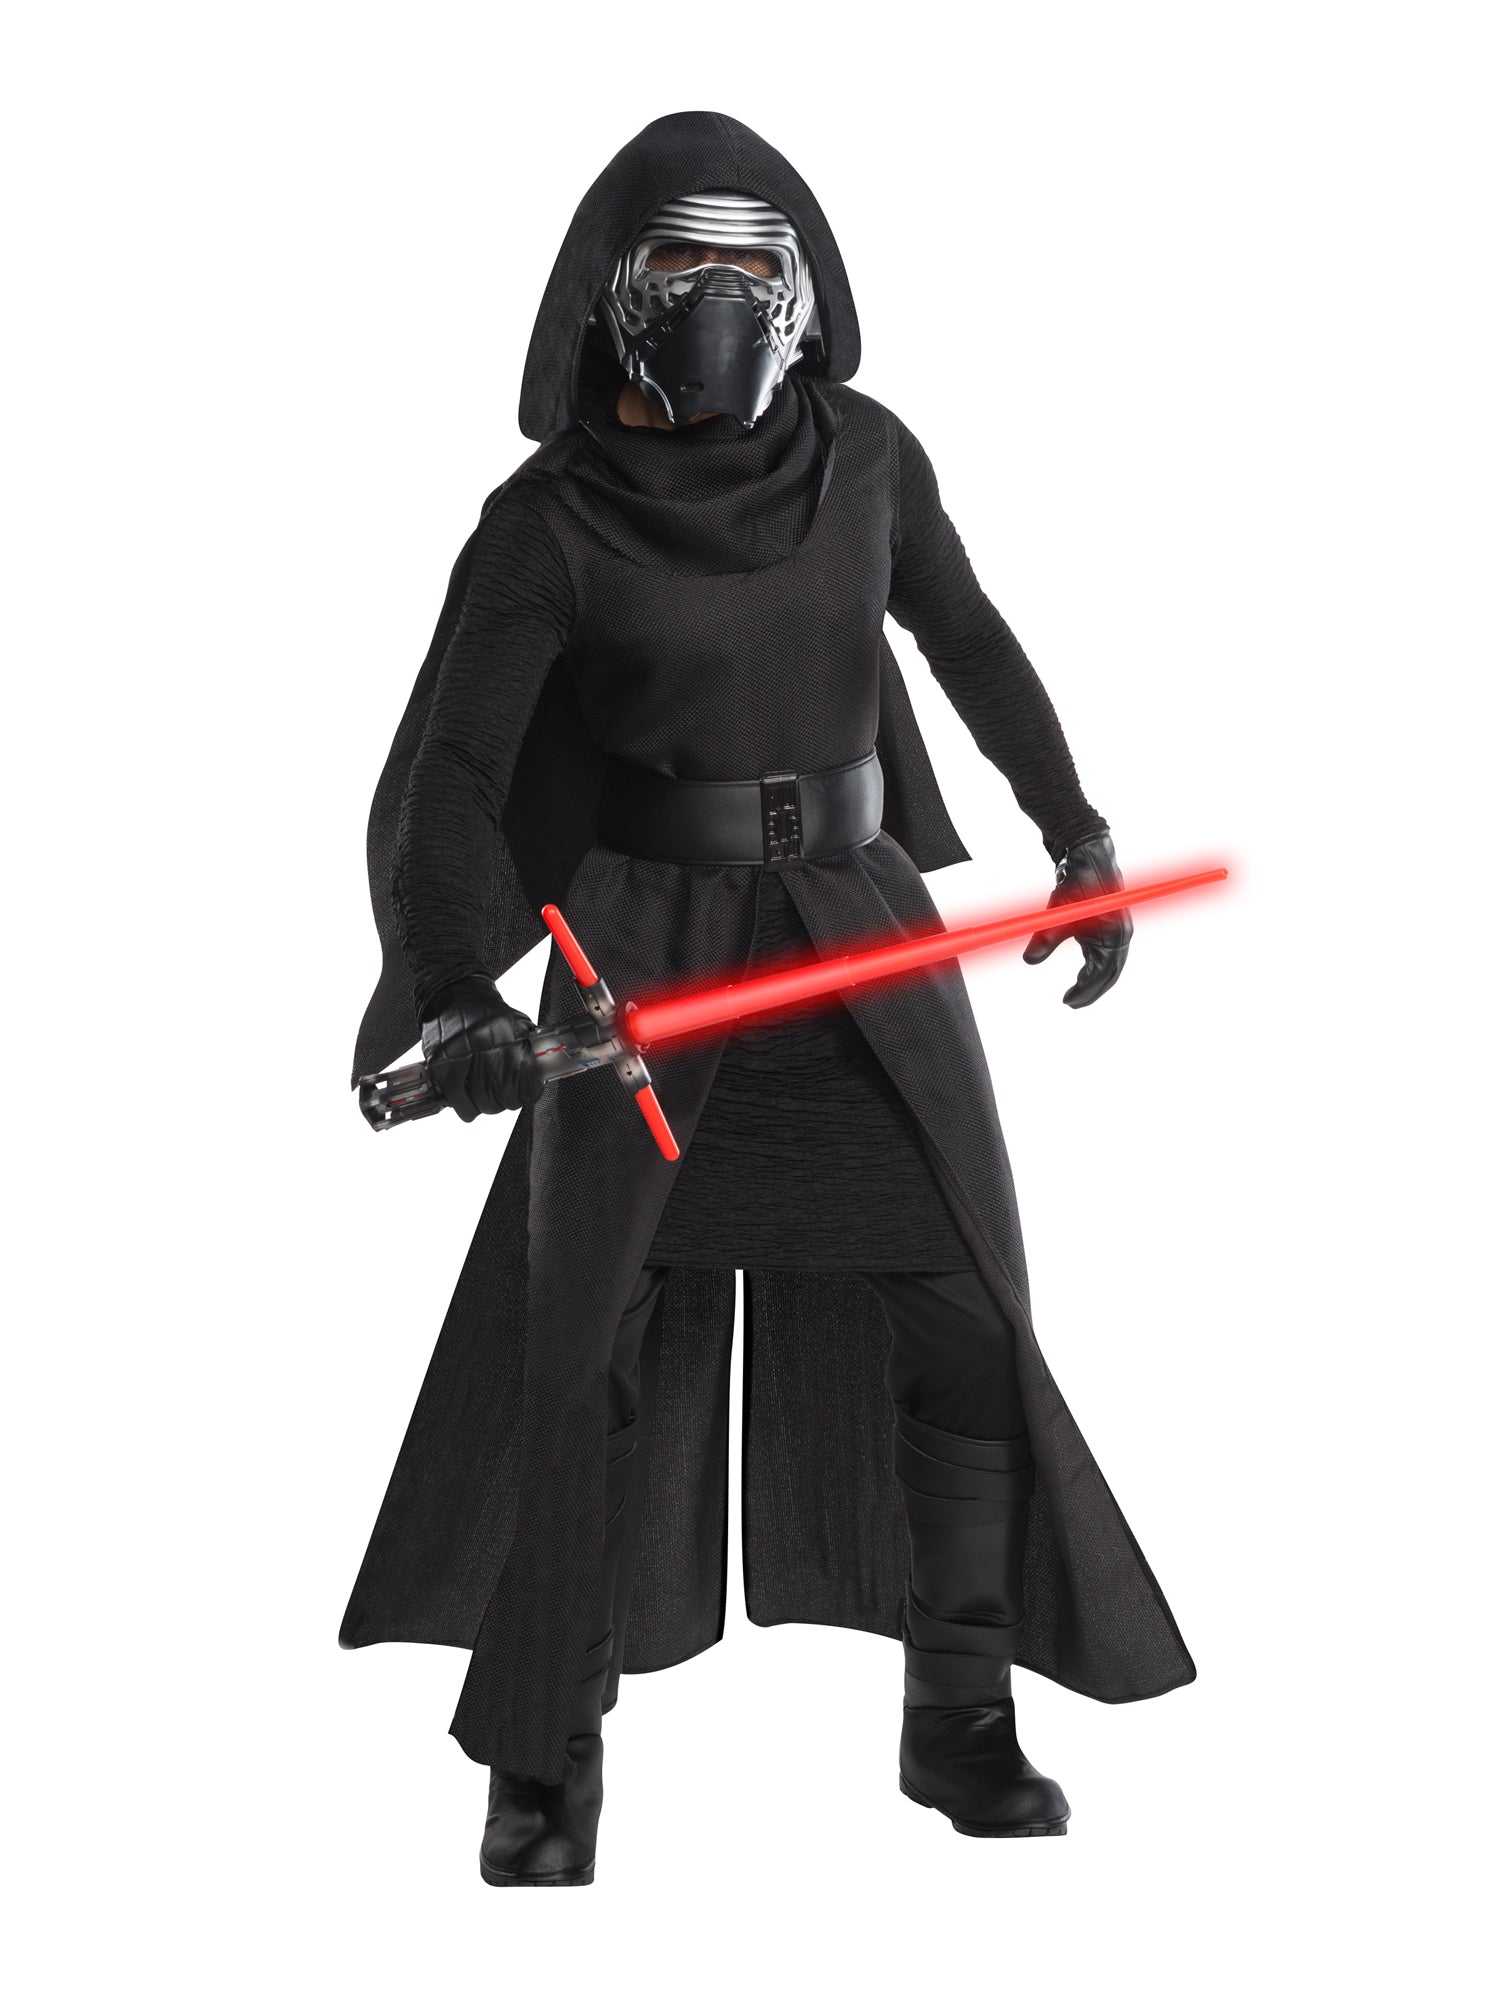 Kylo Ren, The Force Awakens, Episode VII, The Force Awakens, Multi, Star Wars, Adult Costume, Extra Large, Front